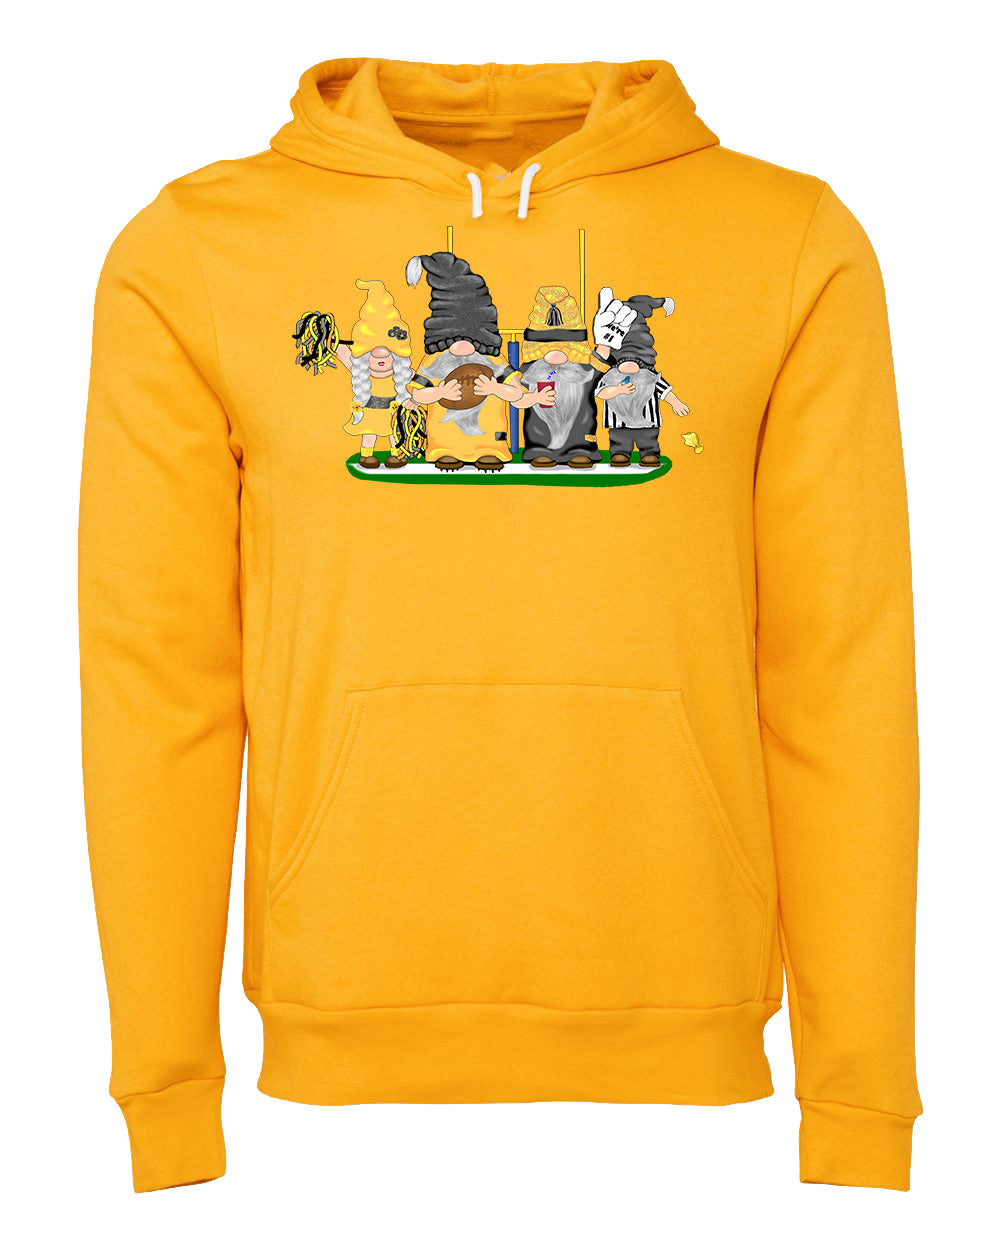 Black & Gold Football Gnomes (similar to Pittsburgh) on Unisex Hoodie